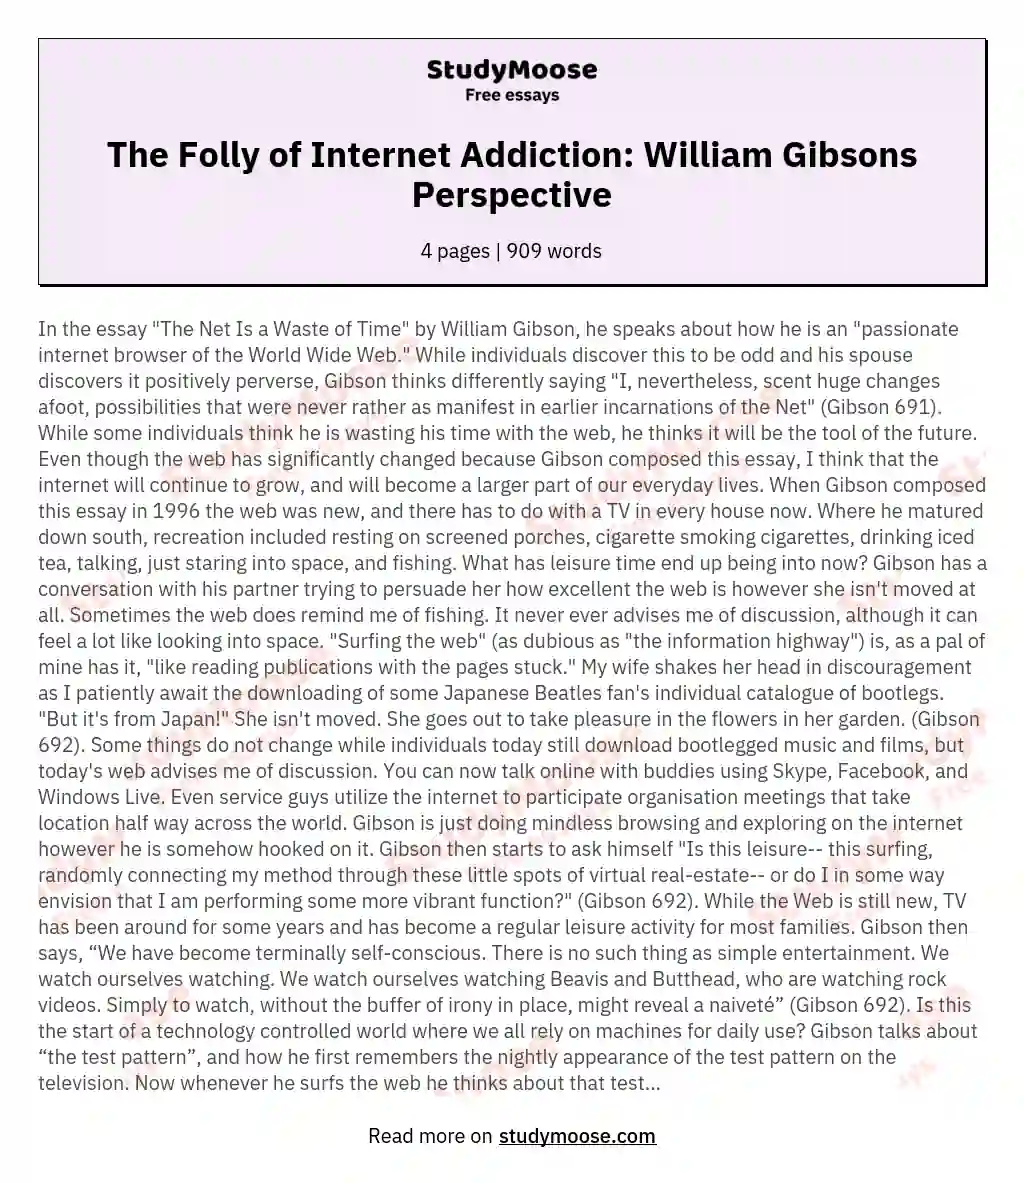 The Folly of Internet Addiction: William Gibsons Perspective essay